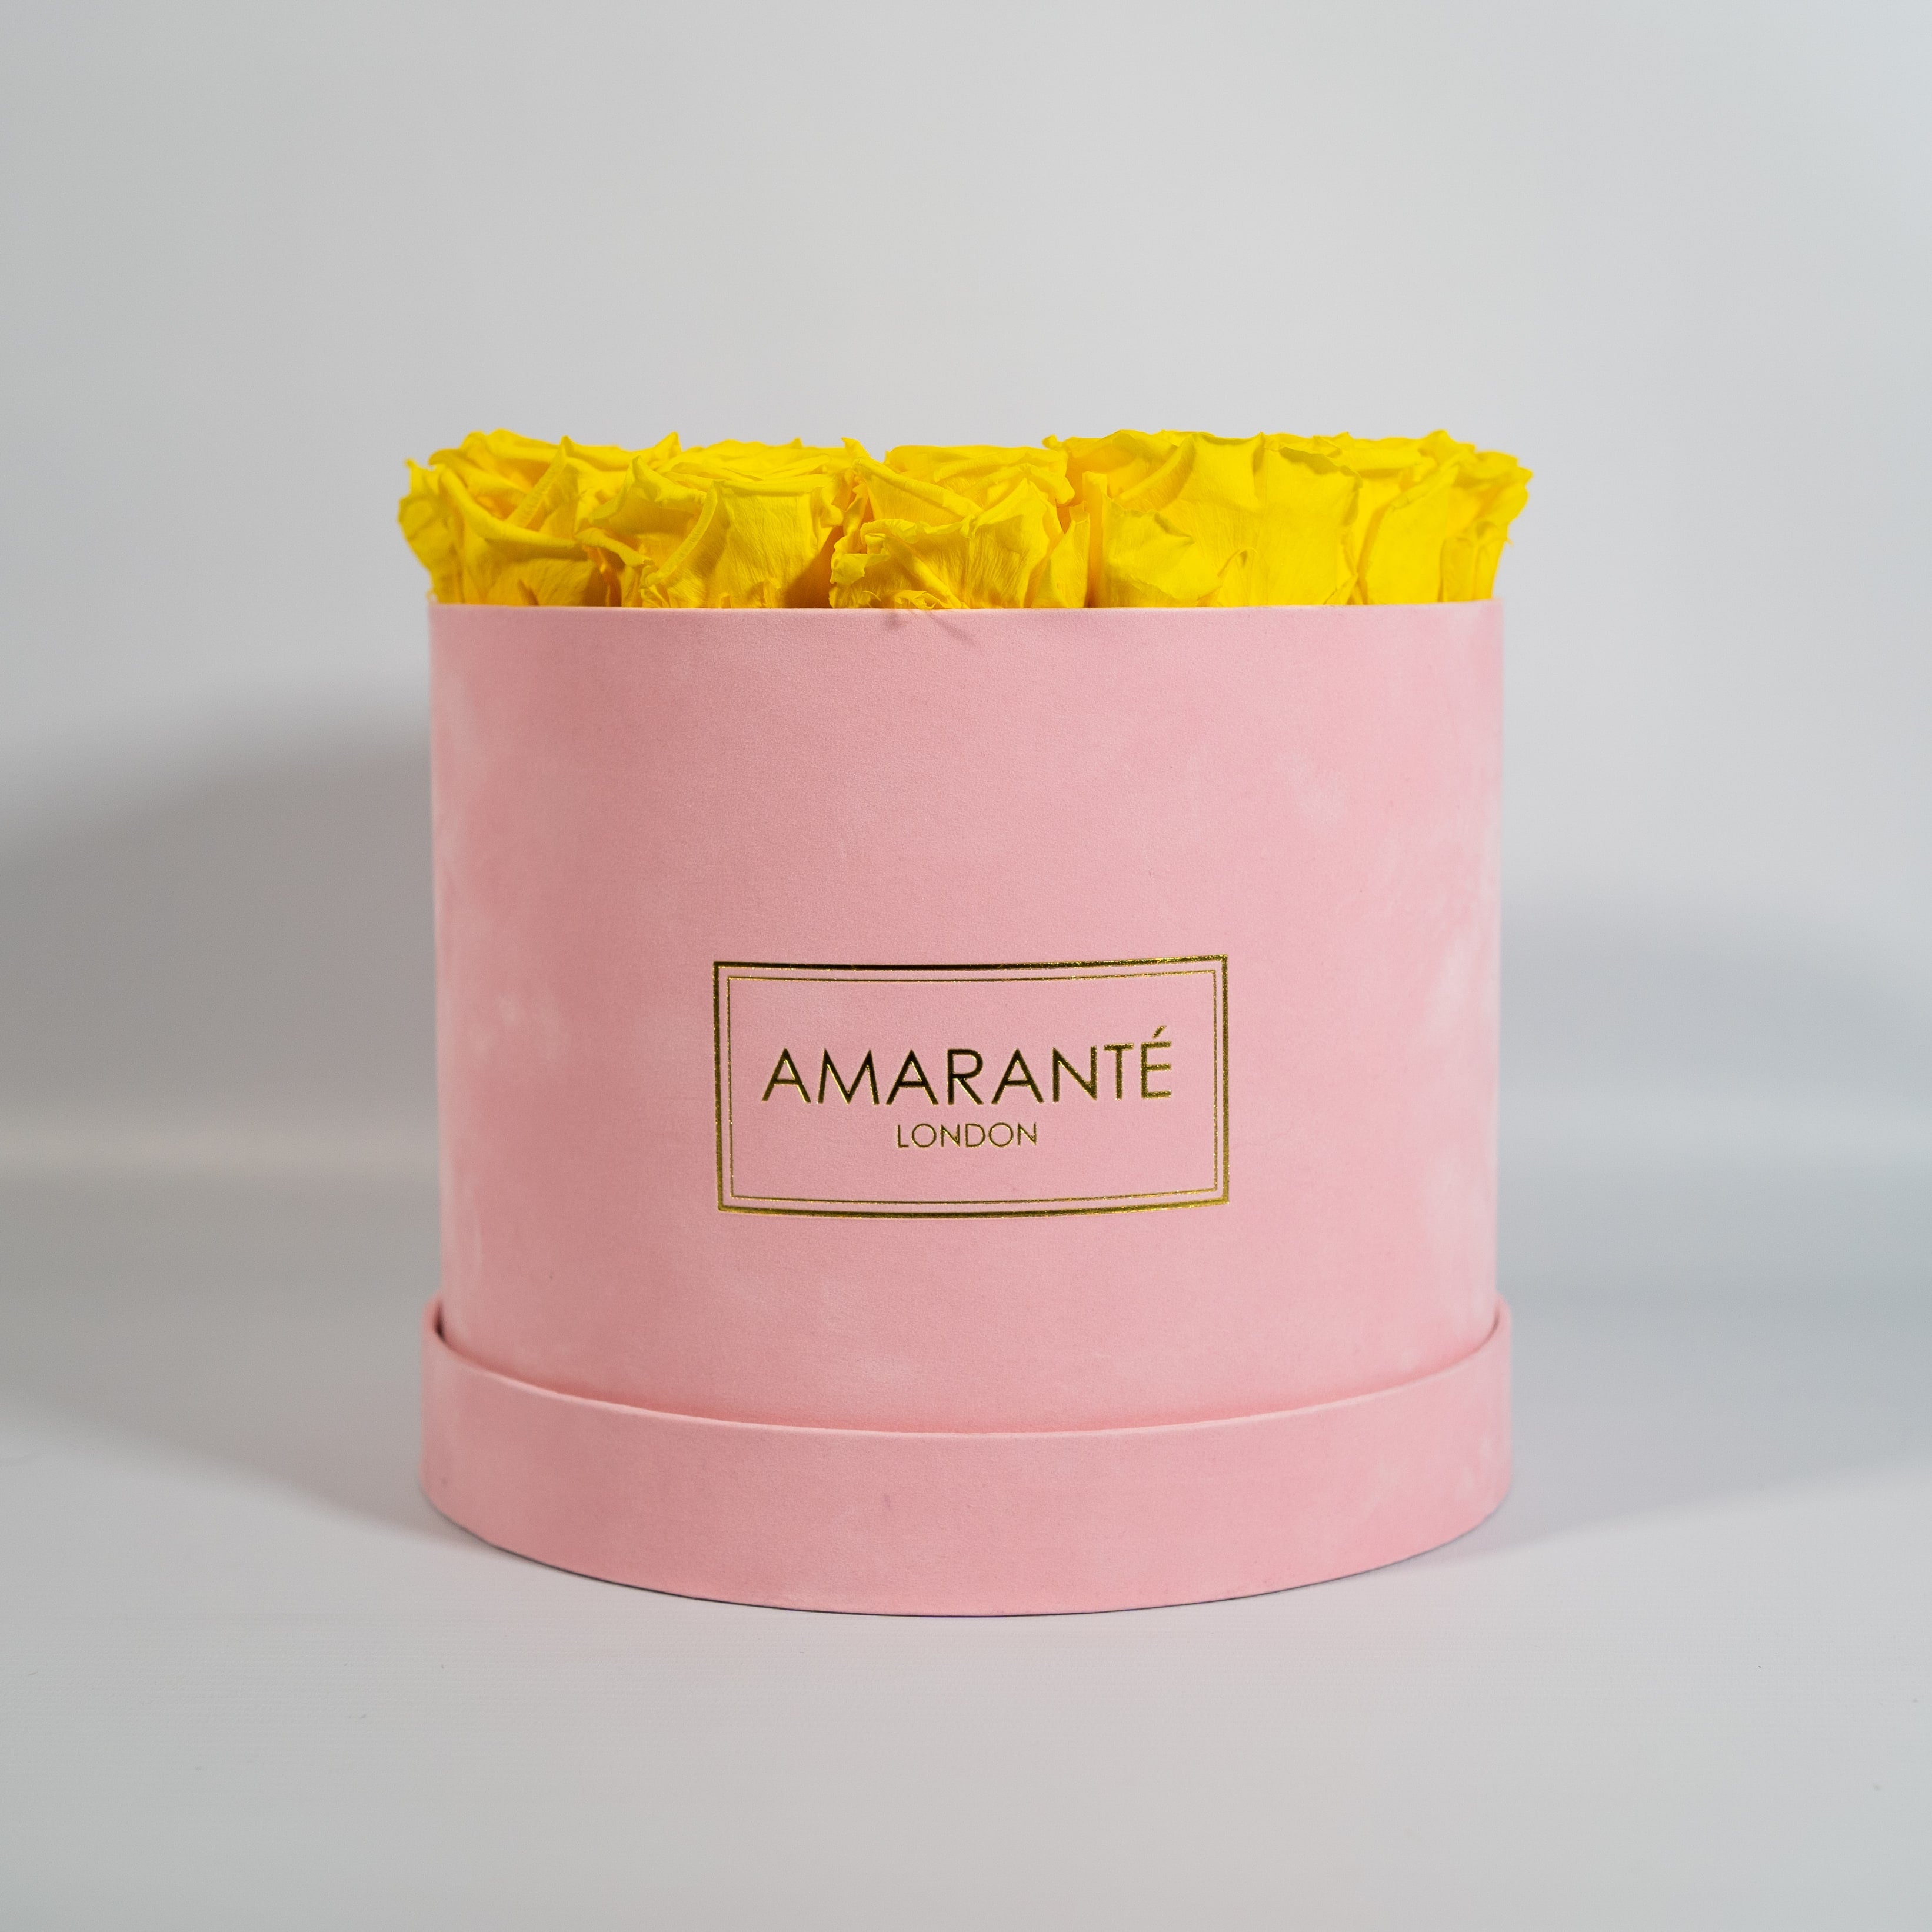 Delightful yellow Roses in a vogueish pink suede box